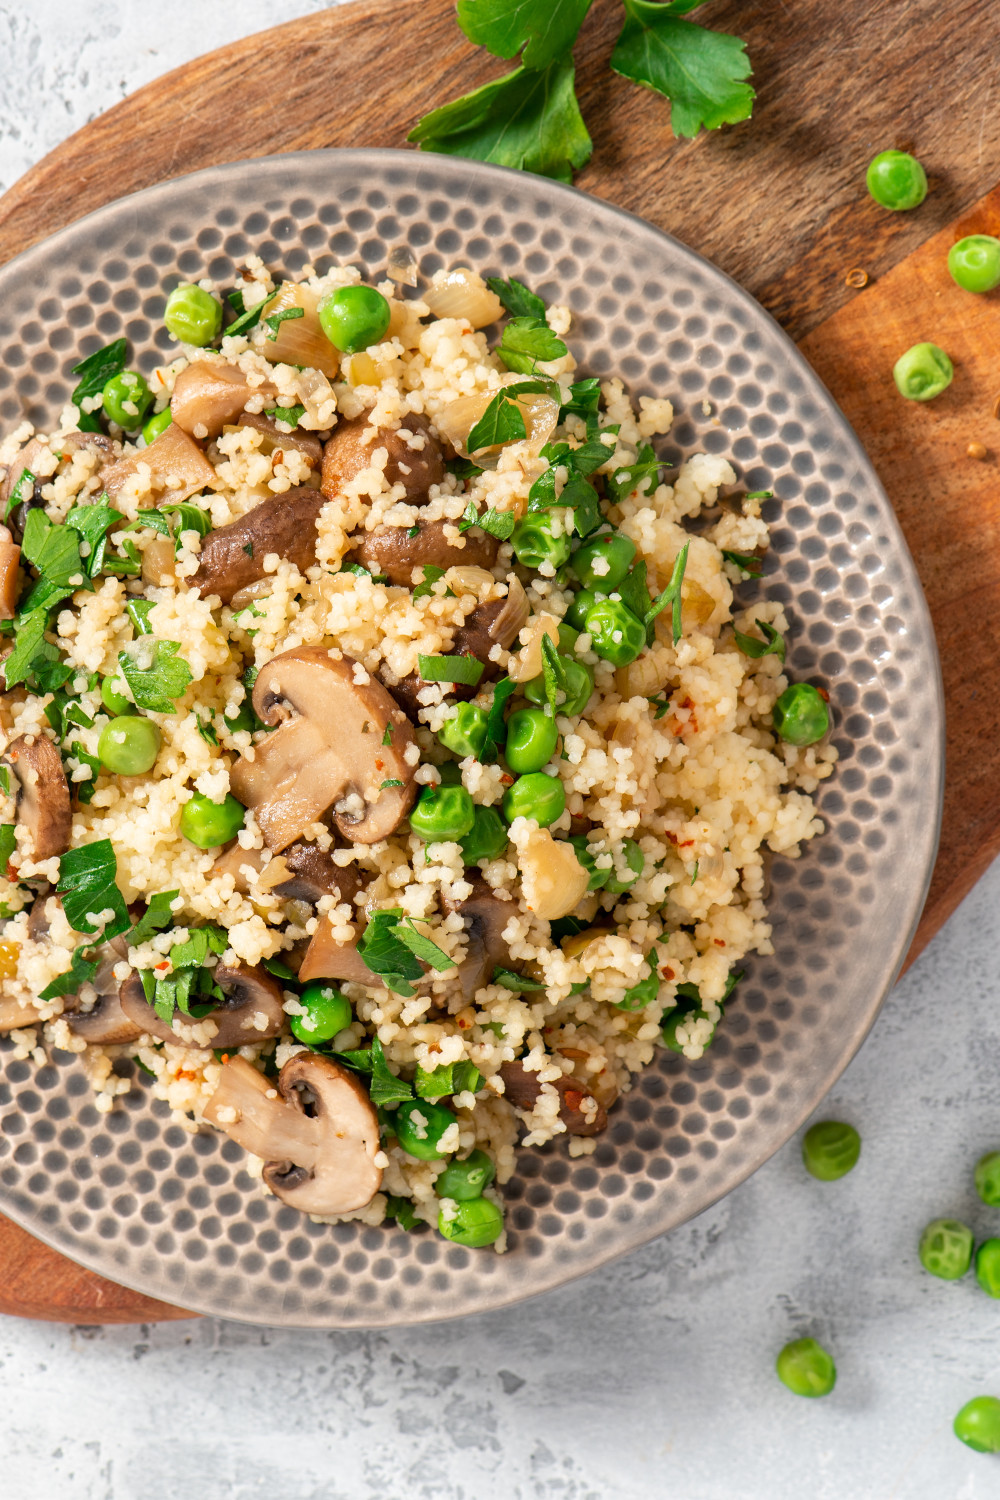 Couscous with fried mushrooms, onions, green peas, and parsley in a plate on a grey background top view.